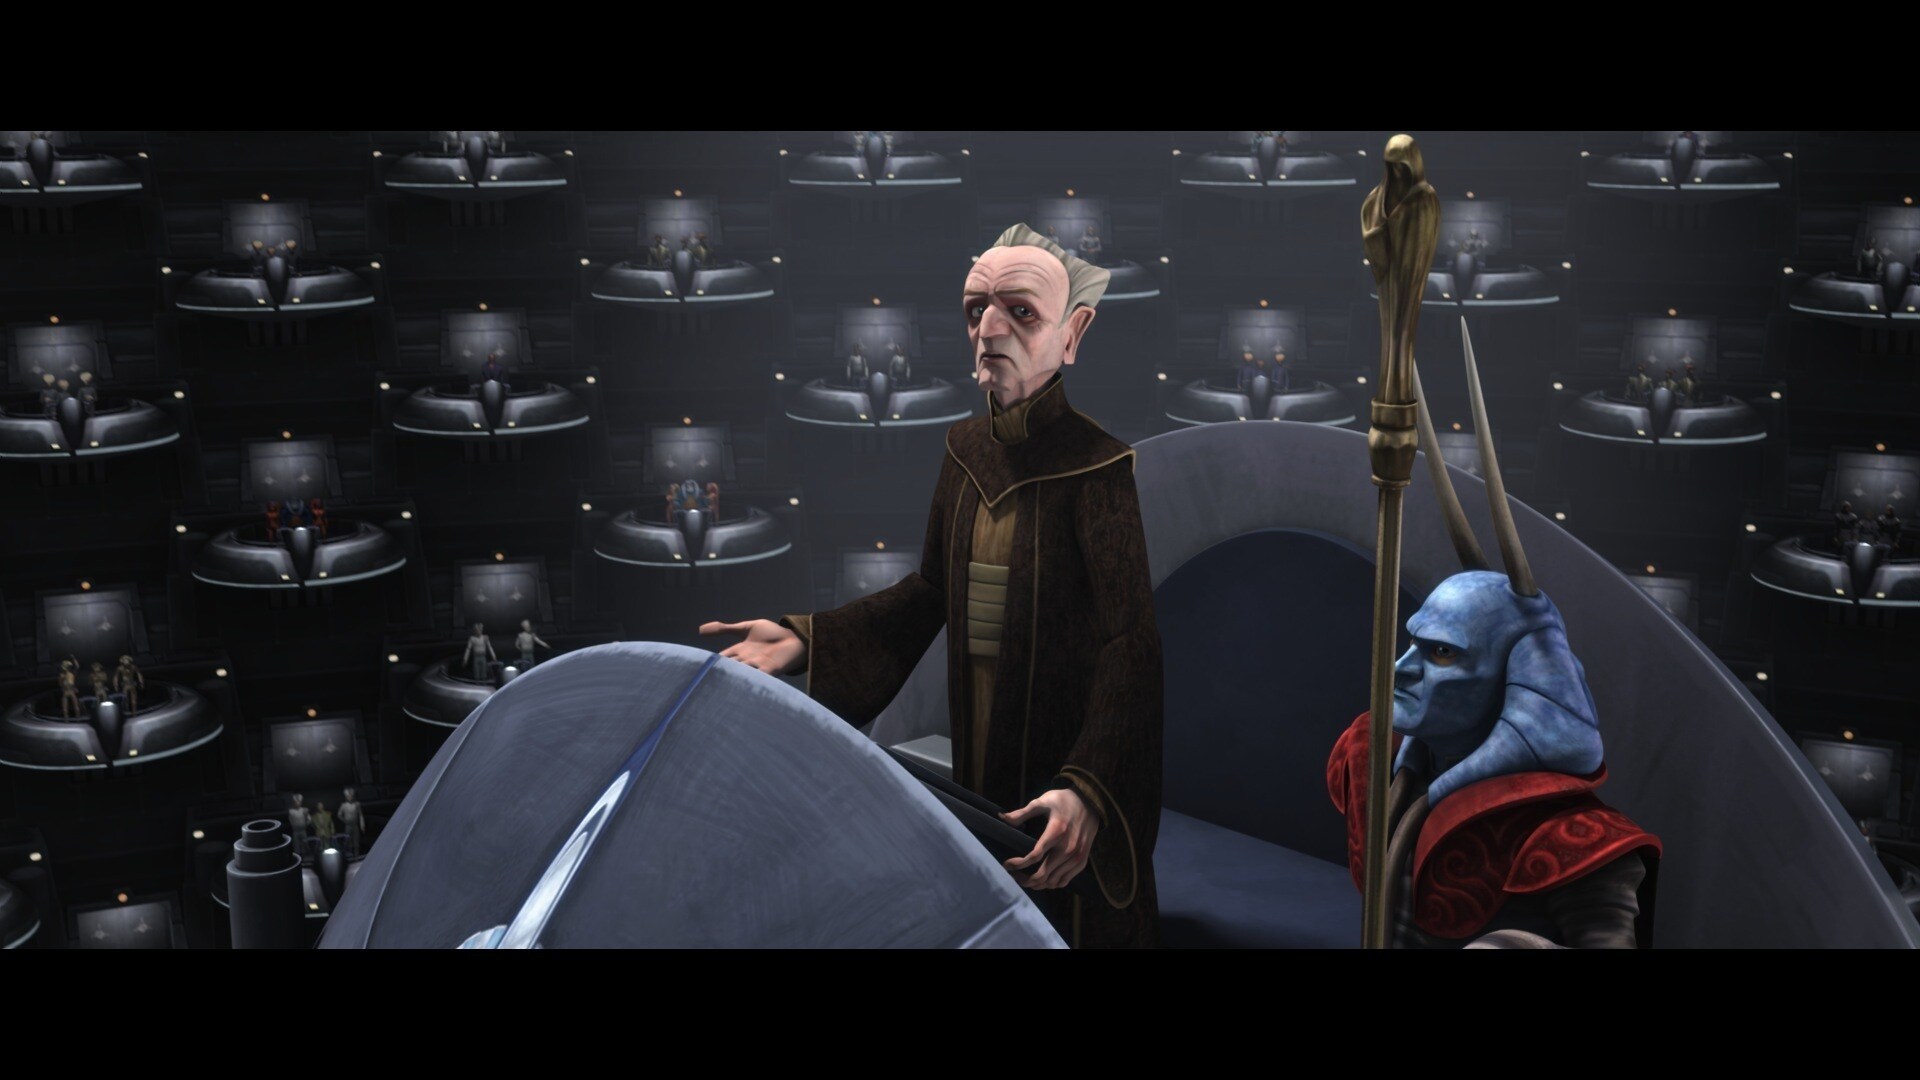 In the Senate, Palpatine tells the assembly what has happened: that Count Dooku and his Separatis...